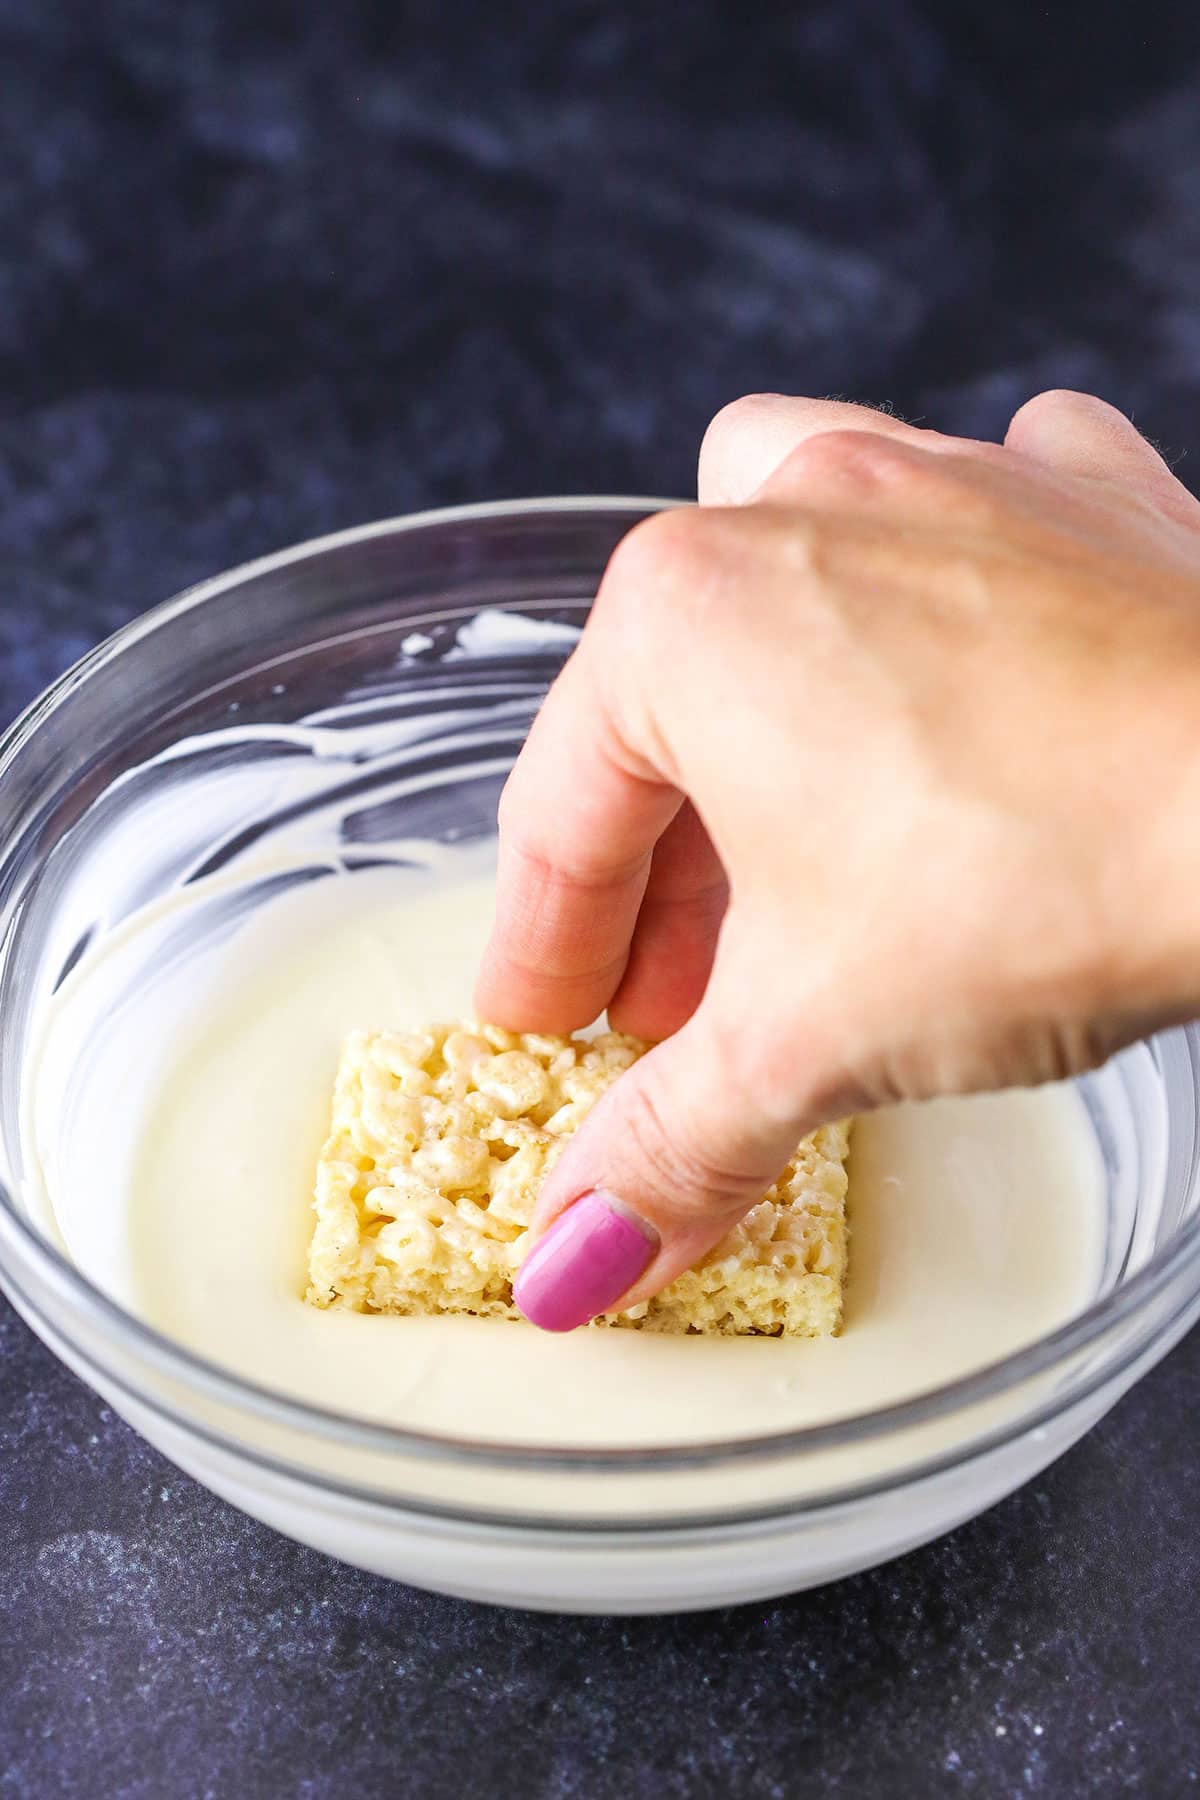 A step in making Mummy Rice Krispies Treats showing dipping a Rice Krispies Treat into melted white chocolate